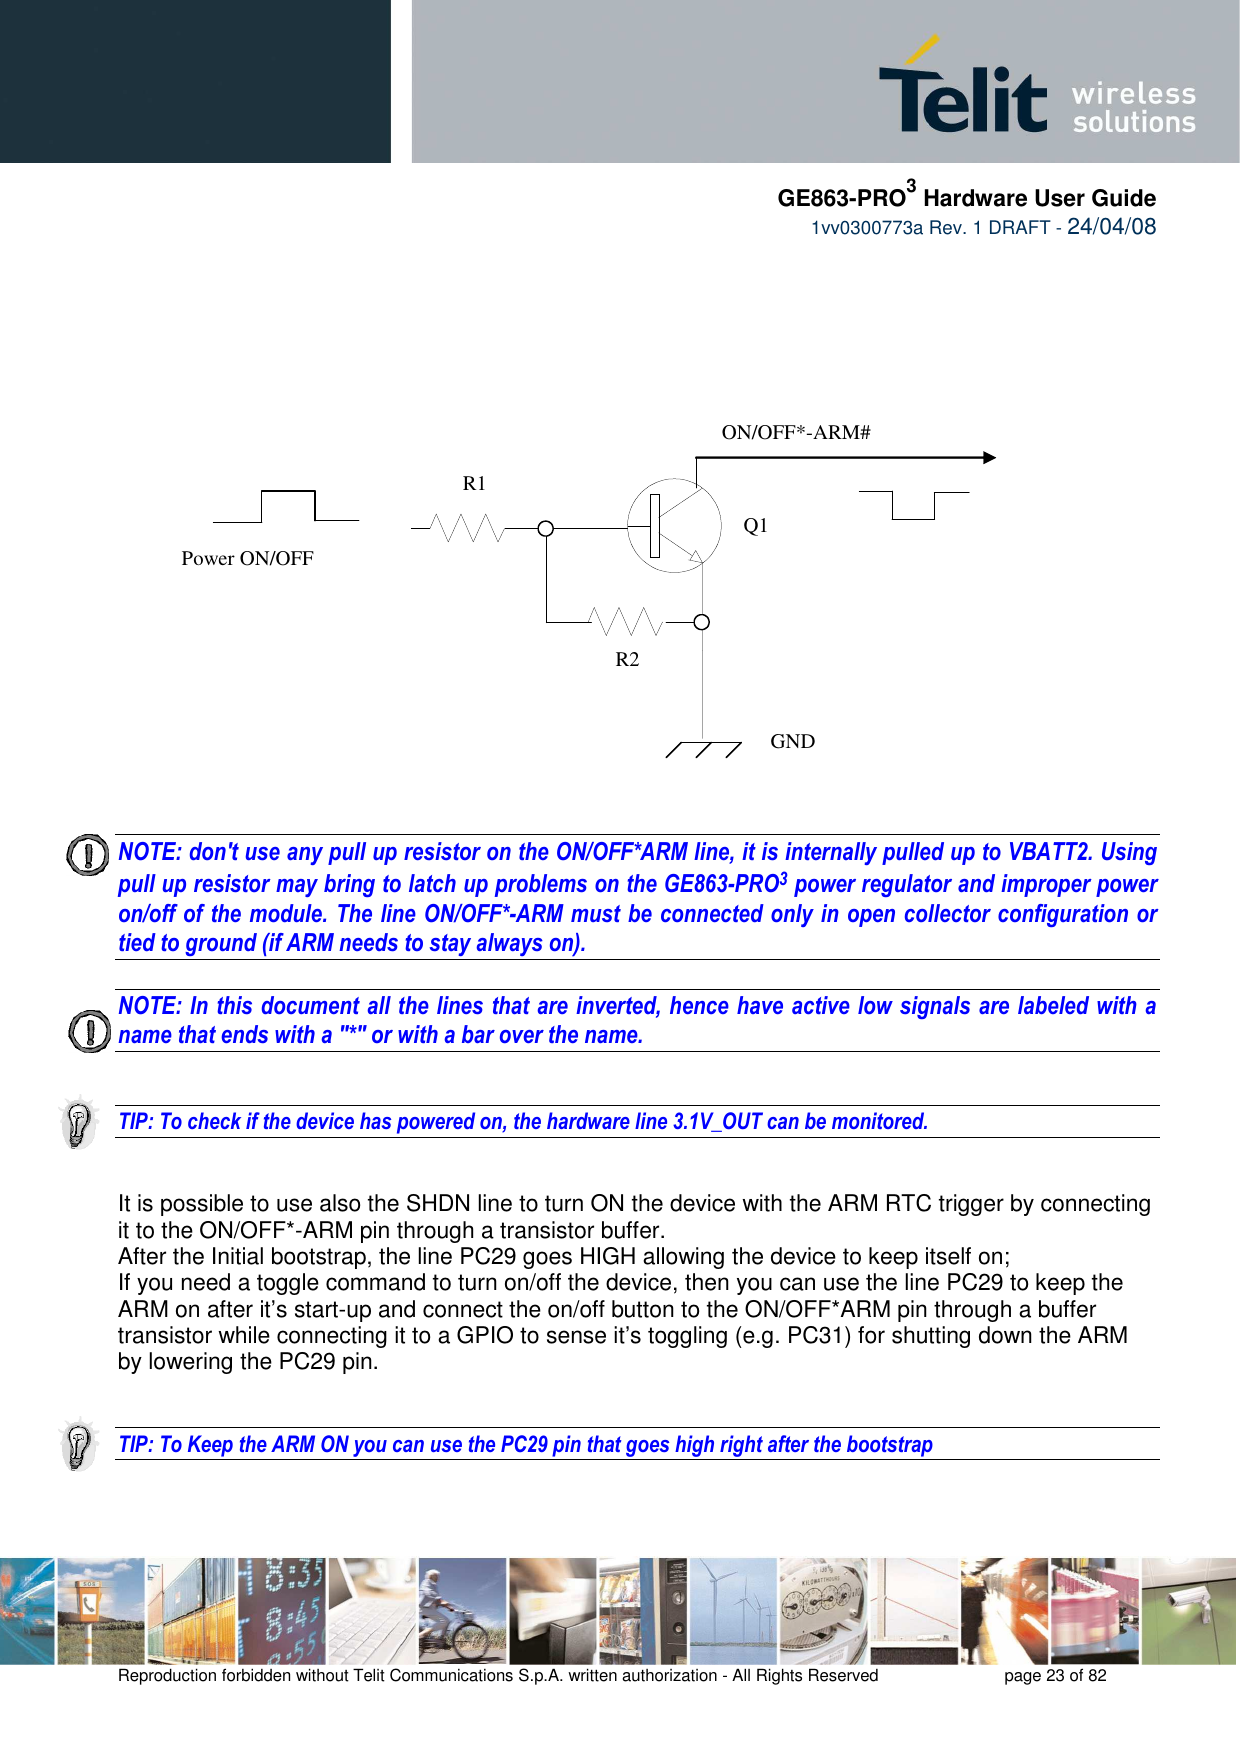     GE863-PRO3 Hardware User Guide  1vv0300773a Rev. 1 DRAFT - 24/04/08    Reproduction forbidden without Telit Communications S.p.A. written authorization - All Rights Reserved    page 23 of 82          NOTE: don&apos;t use any pull up resistor on the ON/OFF*ARM line, it is internally pulled up to VBATT2. Using pull up resistor may bring to latch up problems on the GE863-PRO3 power regulator and improper power on/off of the module. The line ON/OFF*-ARM must be connected only in open collector configuration or tied to ground (if ARM needs to stay always on).  NOTE: In this document all the lines that are inverted, hence have active low signals are labeled with a name that ends with a &quot;*&quot; or with a bar over the name.   TIP: To check if the device has powered on, the hardware line 3.1V_OUT can be monitored.    It is possible to use also the SHDN line to turn ON the device with the ARM RTC trigger by connecting it to the ON/OFF*-ARM pin through a transistor buffer. After the Initial bootstrap, the line PC29 goes HIGH allowing the device to keep itself on; If you need a toggle command to turn on/off the device, then you can use the line PC29 to keep the ARM on after it’s start-up and connect the on/off button to the ON/OFF*ARM pin through a buffer transistor while connecting it to a GPIO to sense it’s toggling (e.g. PC31) for shutting down the ARM by lowering the PC29 pin.   TIP: To Keep the ARM ON you can use the PC29 pin that goes high right after the bootstrap      ON/OFF*-ARM# Power ON/OFF   GND R1 R2 Q1 